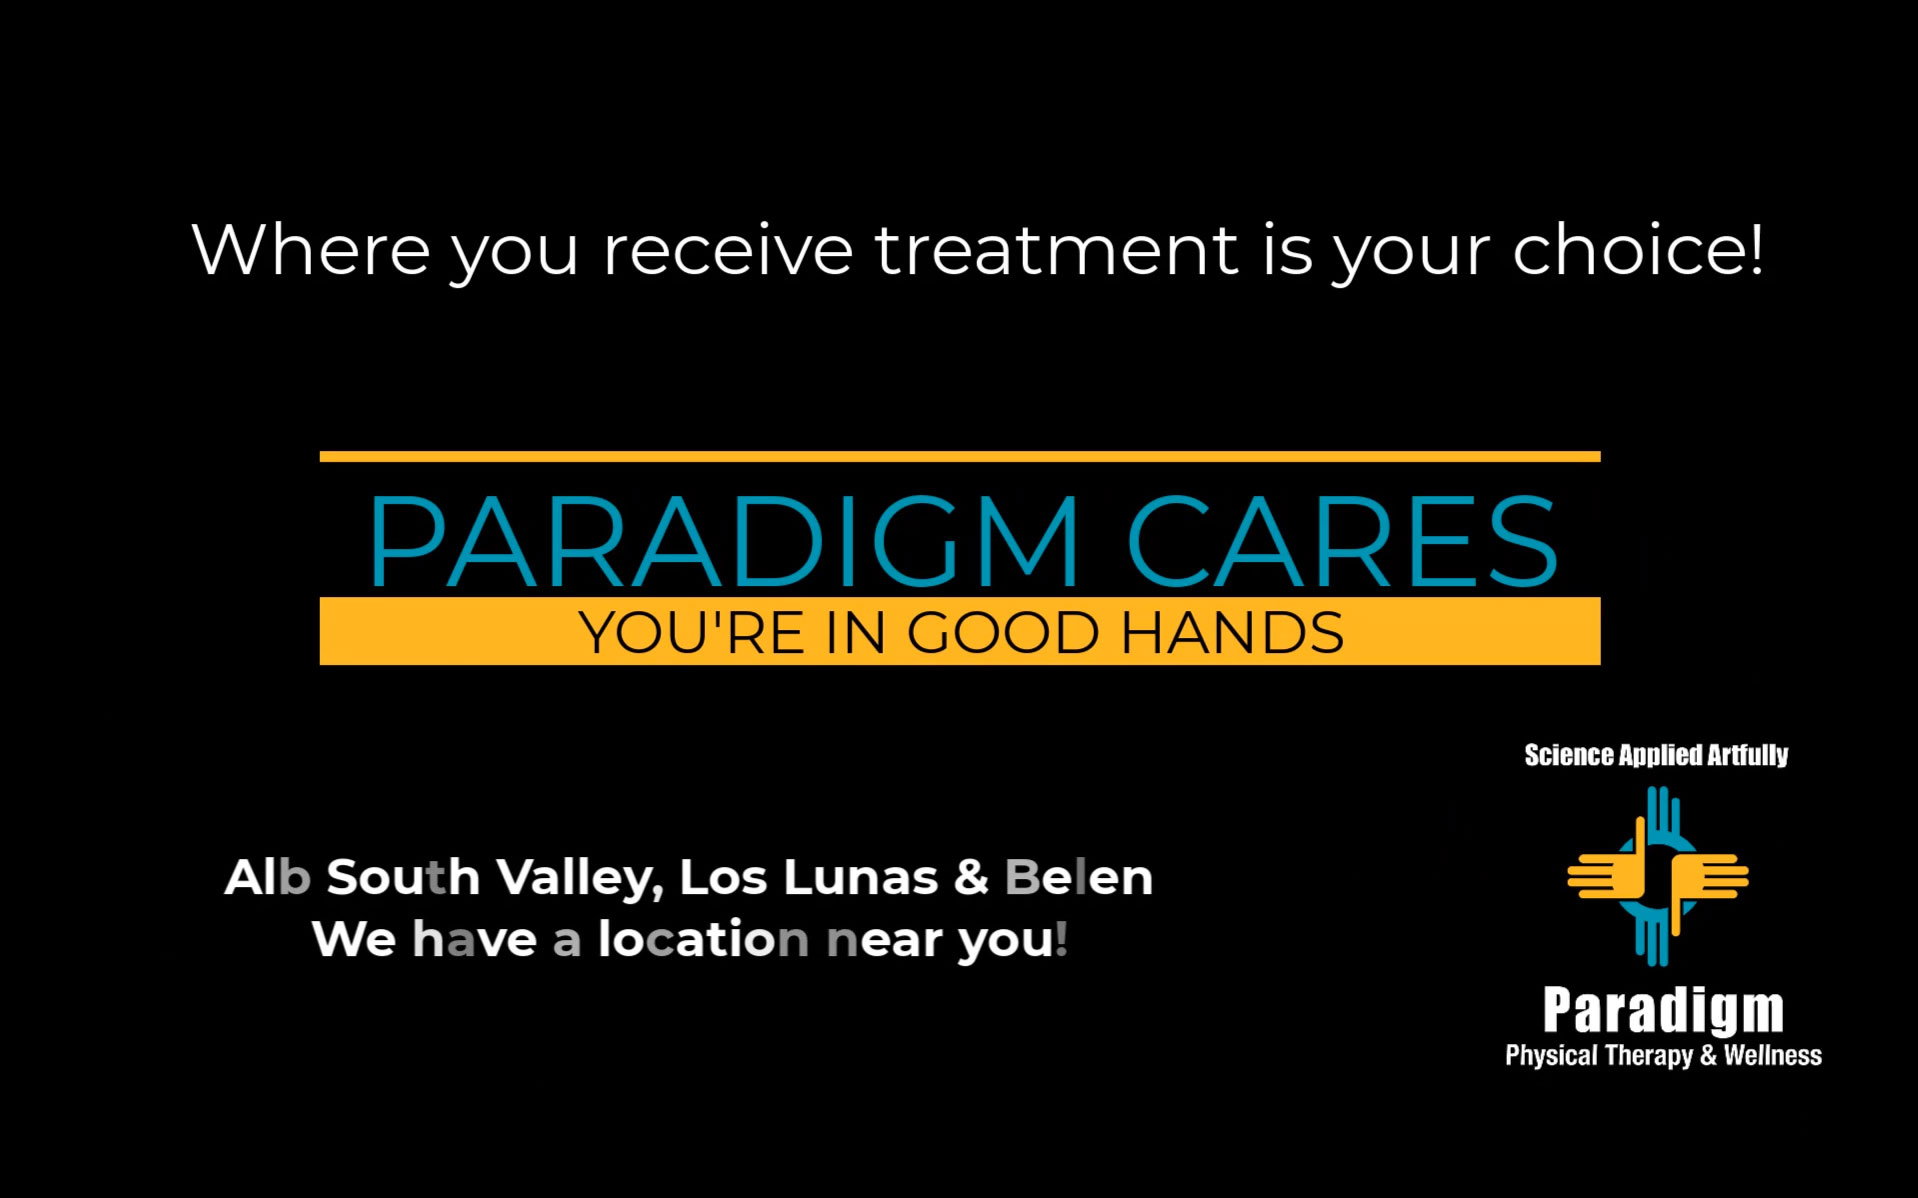 Did you know, you have the choice where to receive your physical therapy?